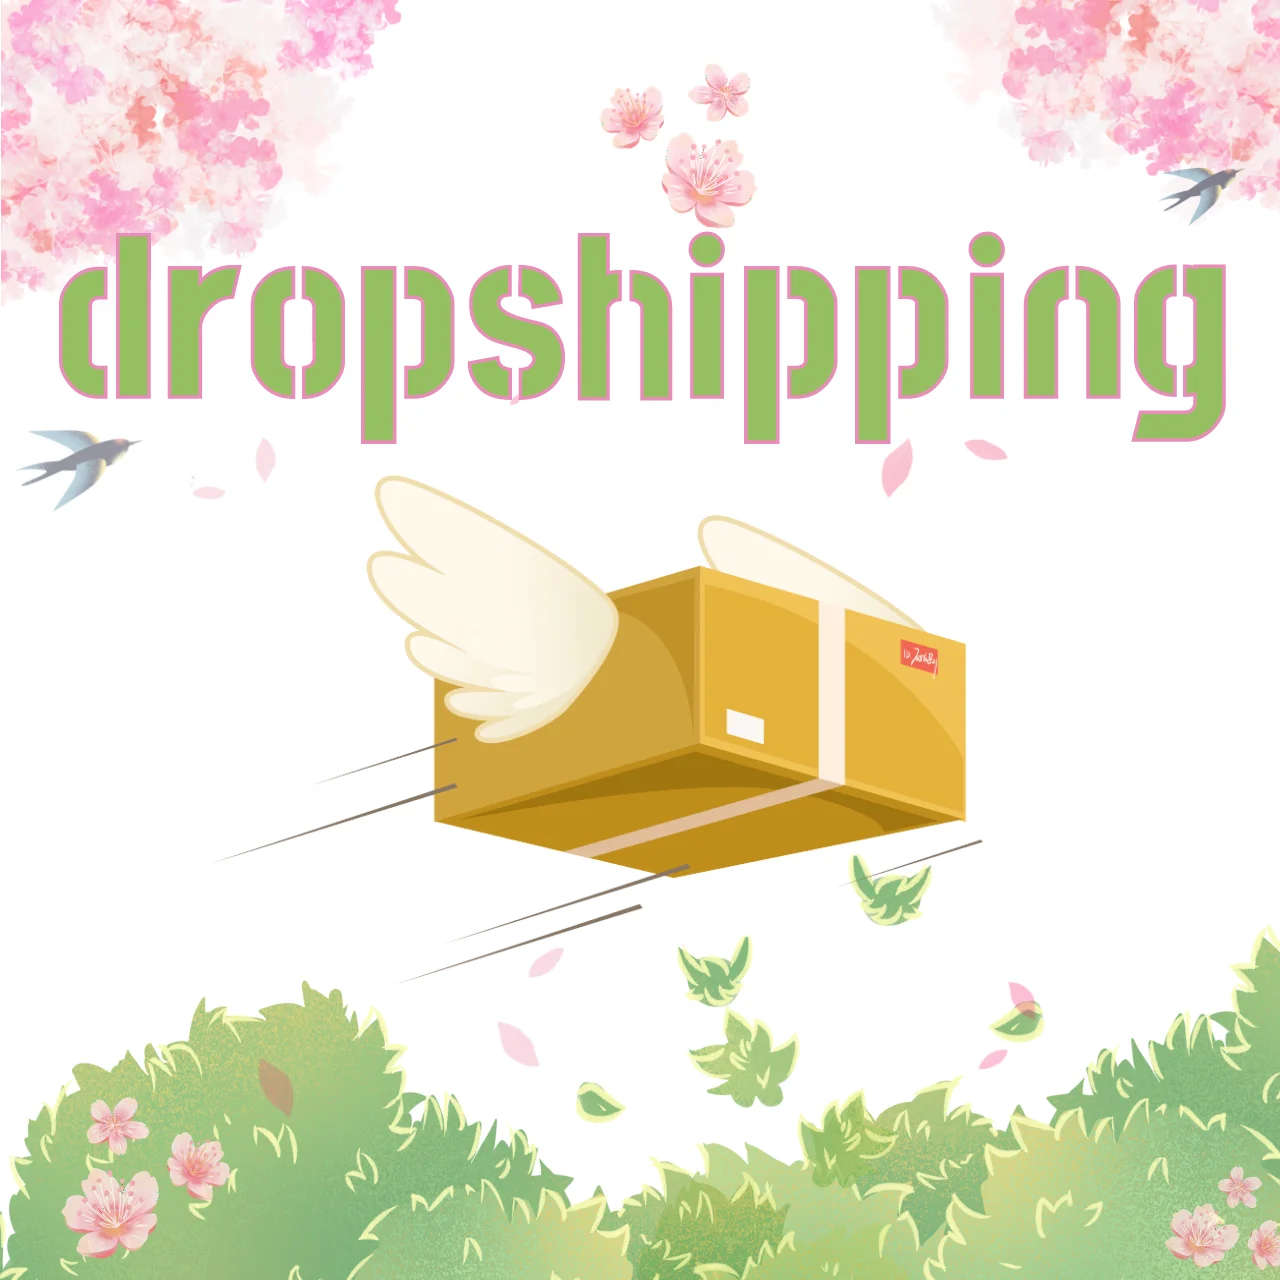 Excellent Shopify Dropshipping Fulfillment Services Dropshipping Business Usa Dropshipping